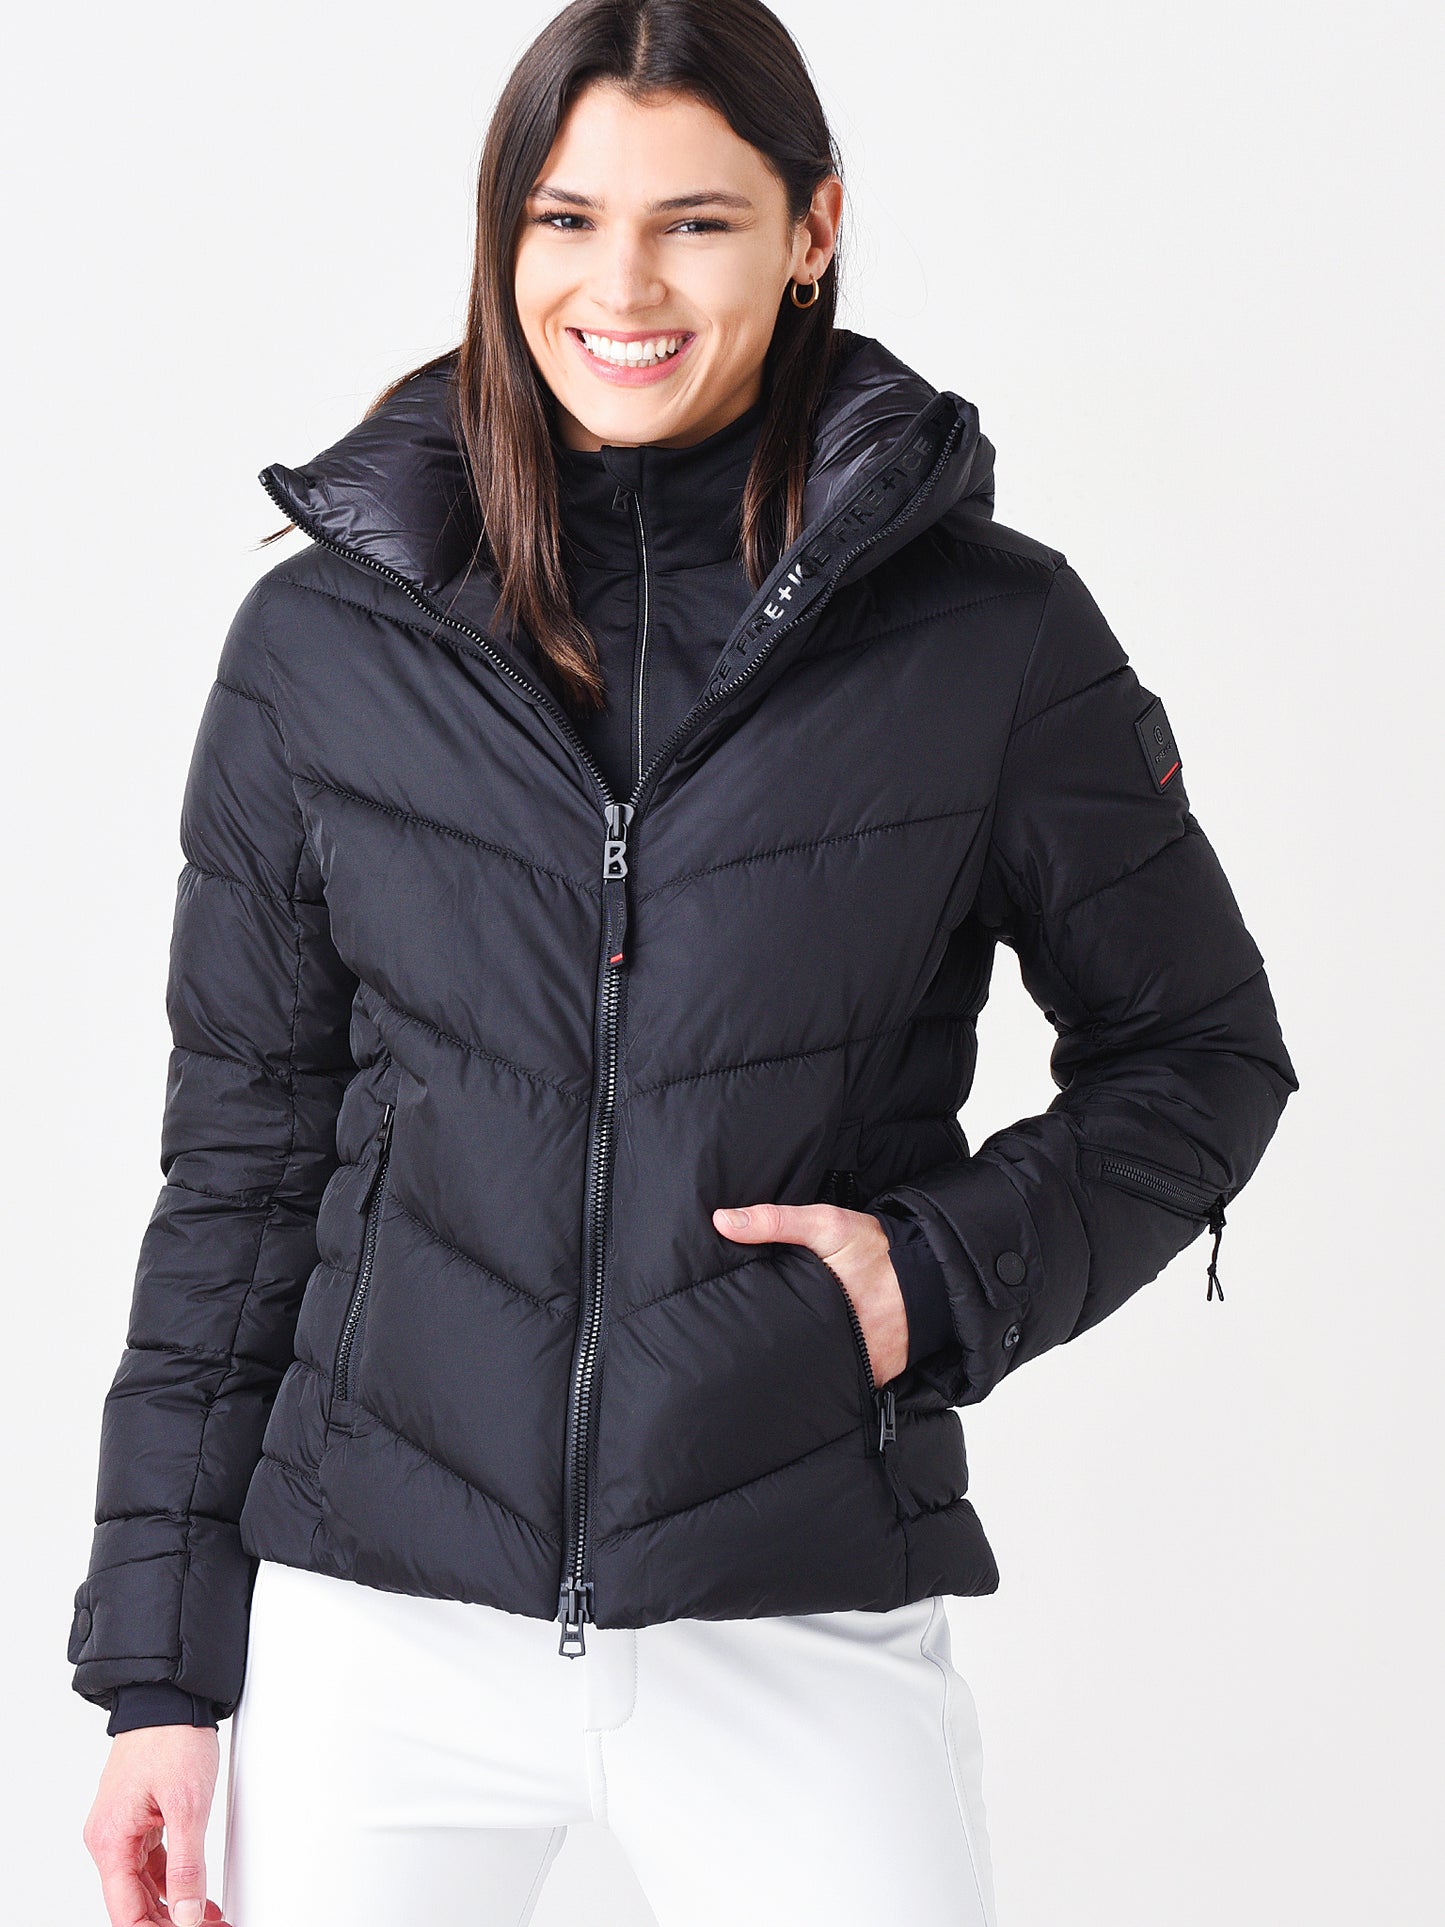 Bogner Fire + Ice Women's Saelly Insulated Ski Jacket